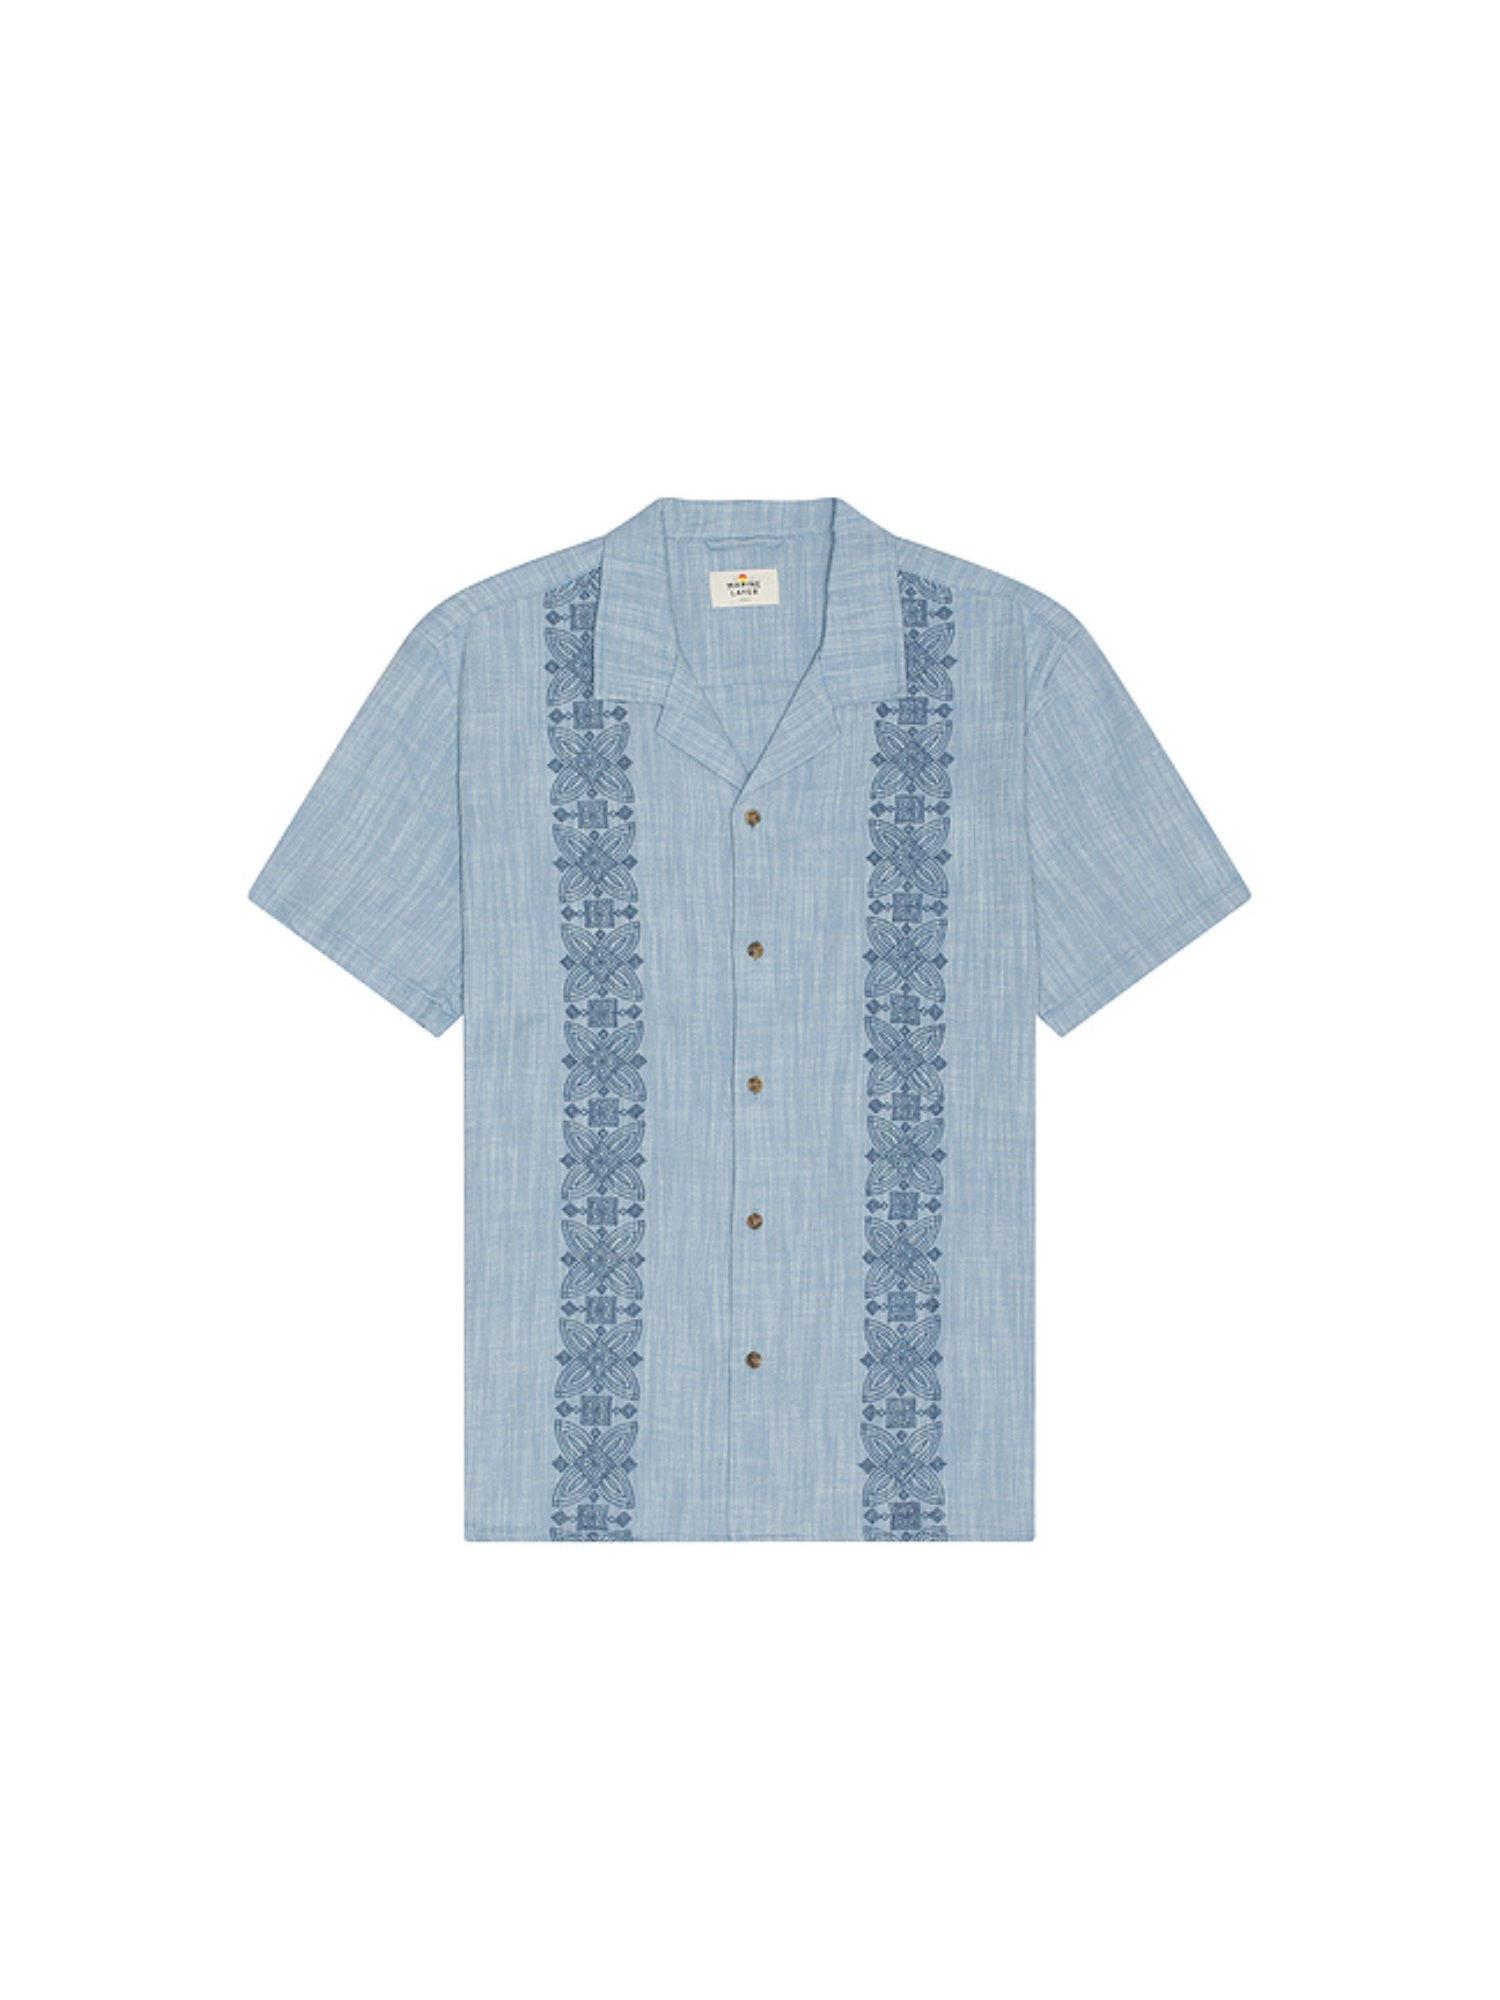 embroidered selvage shirt